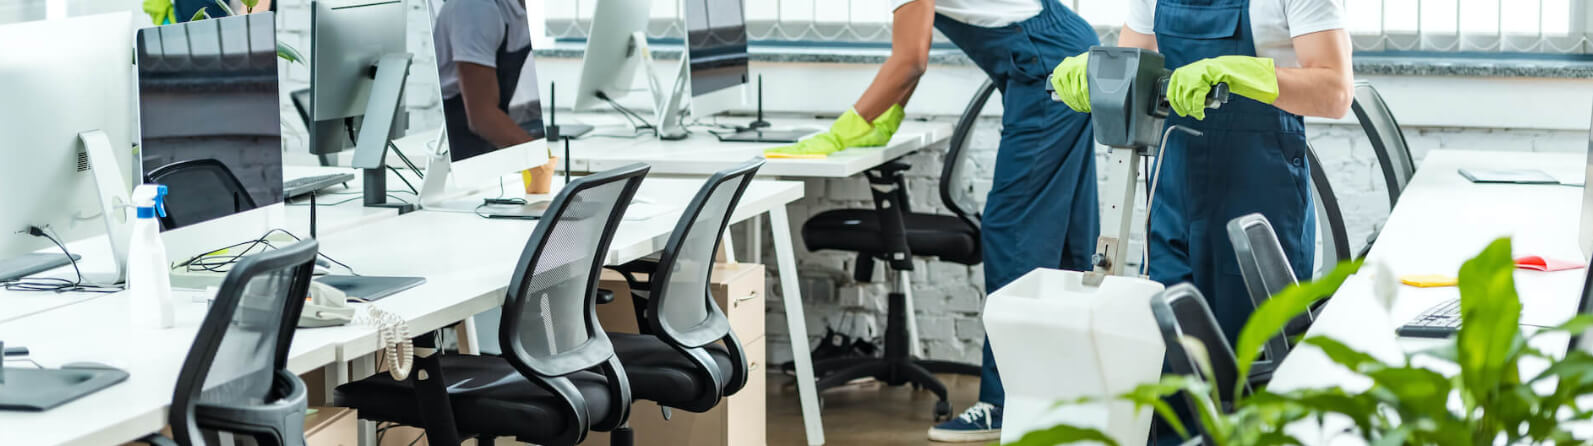 Customized Office Cleaning Services 